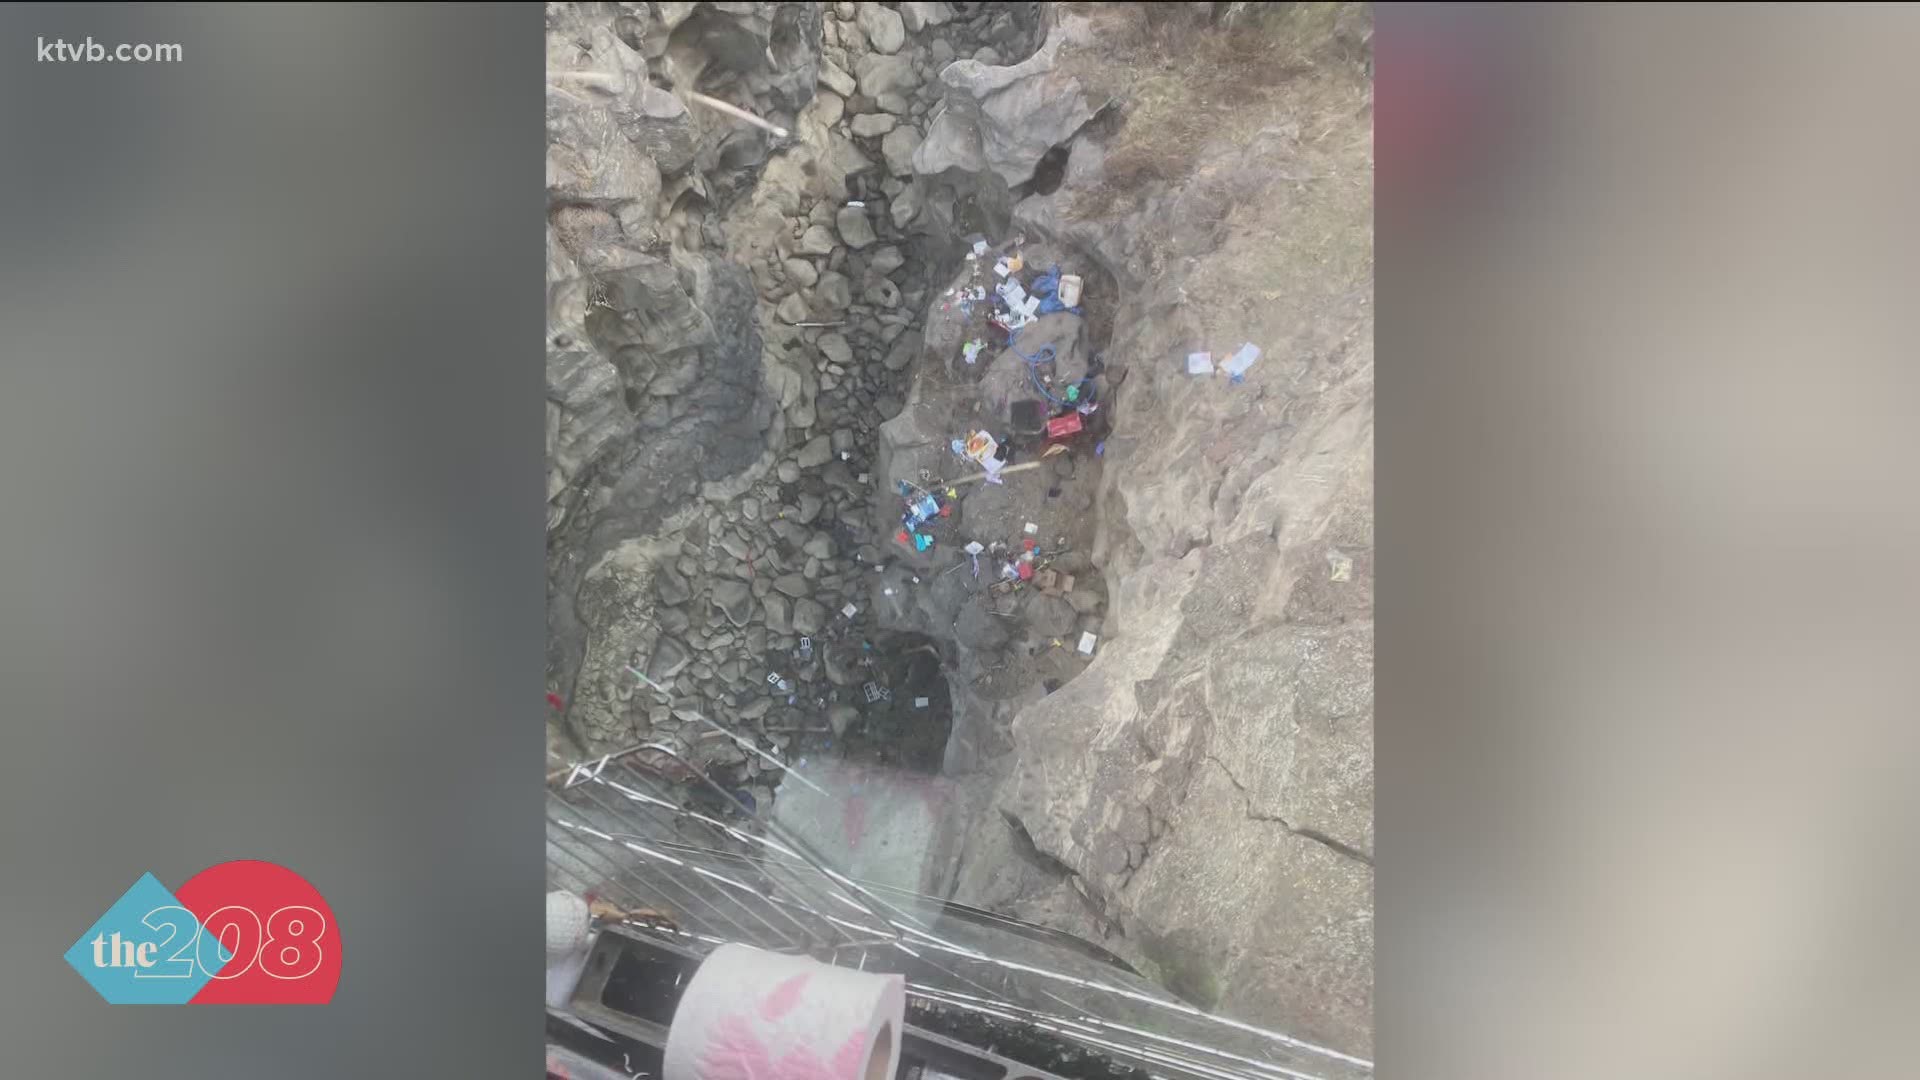 For over an hour, the couple looked down at the 80-foot drop below then, watching their belongings fall to the bottom of the gorge.